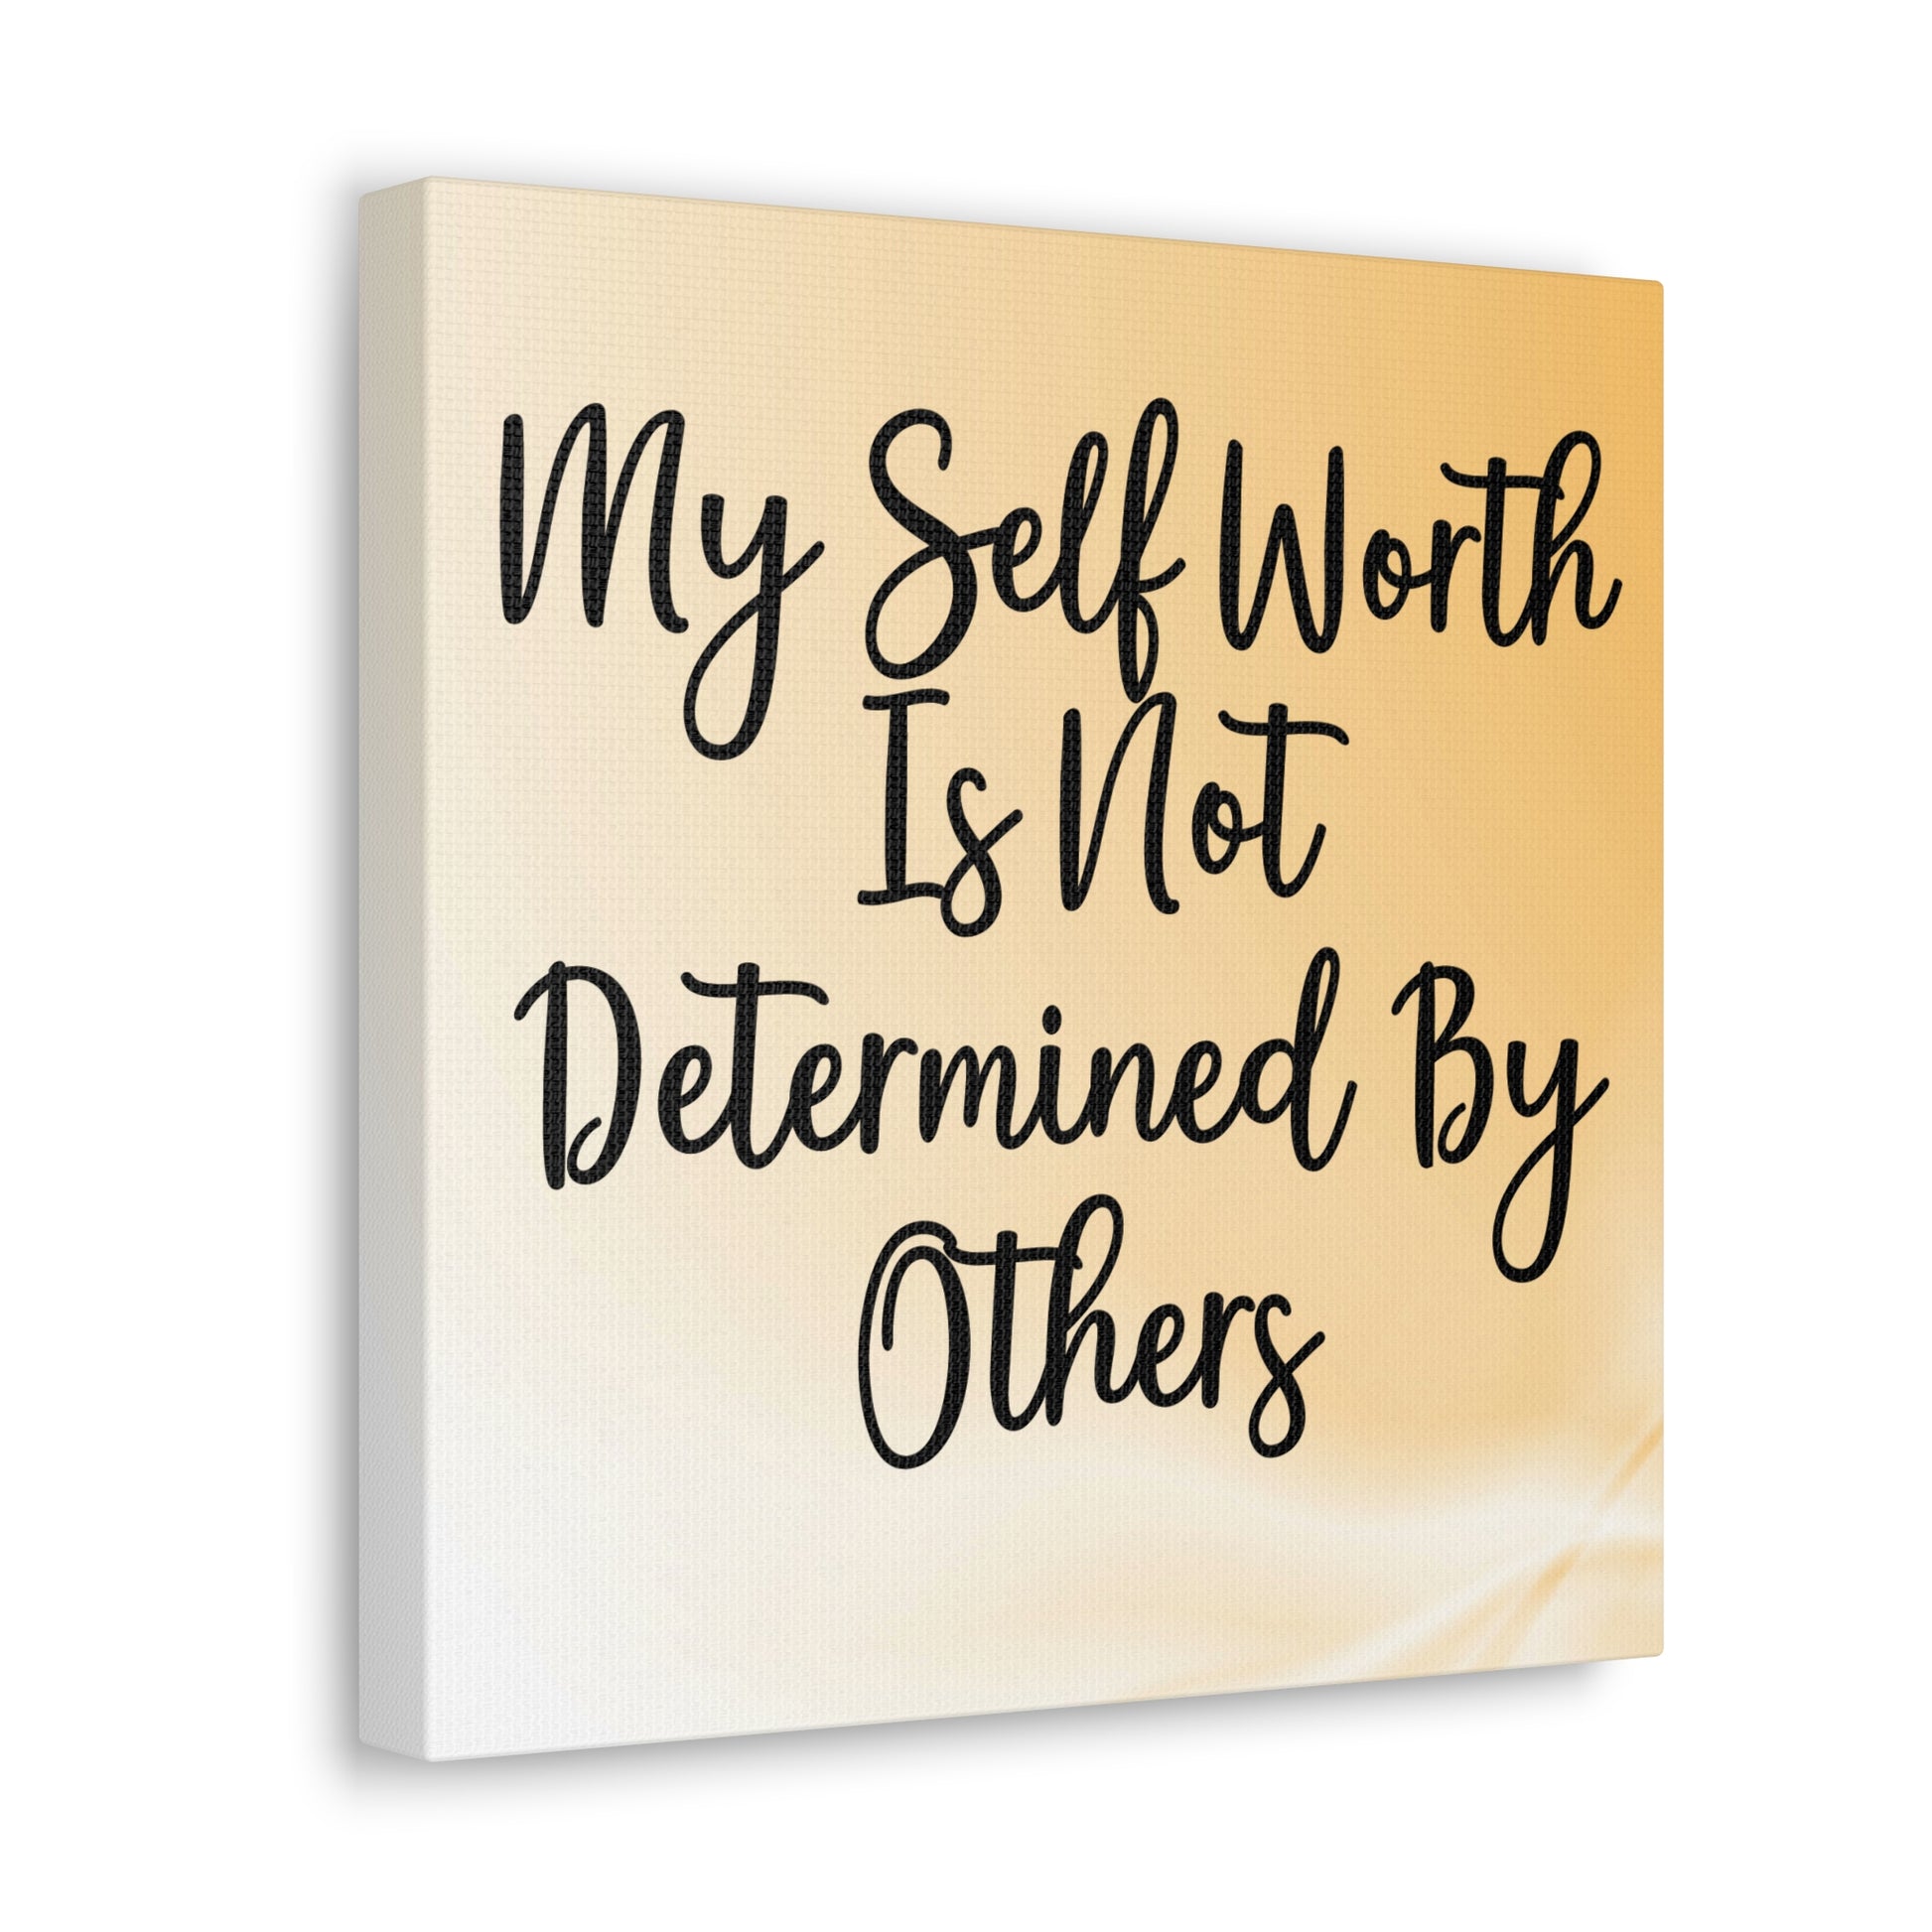 "My Self Worth Is Not Determined By Others" Wall Art - Weave Got Gifts - Unique Gifts You Won’t Find Anywhere Else!